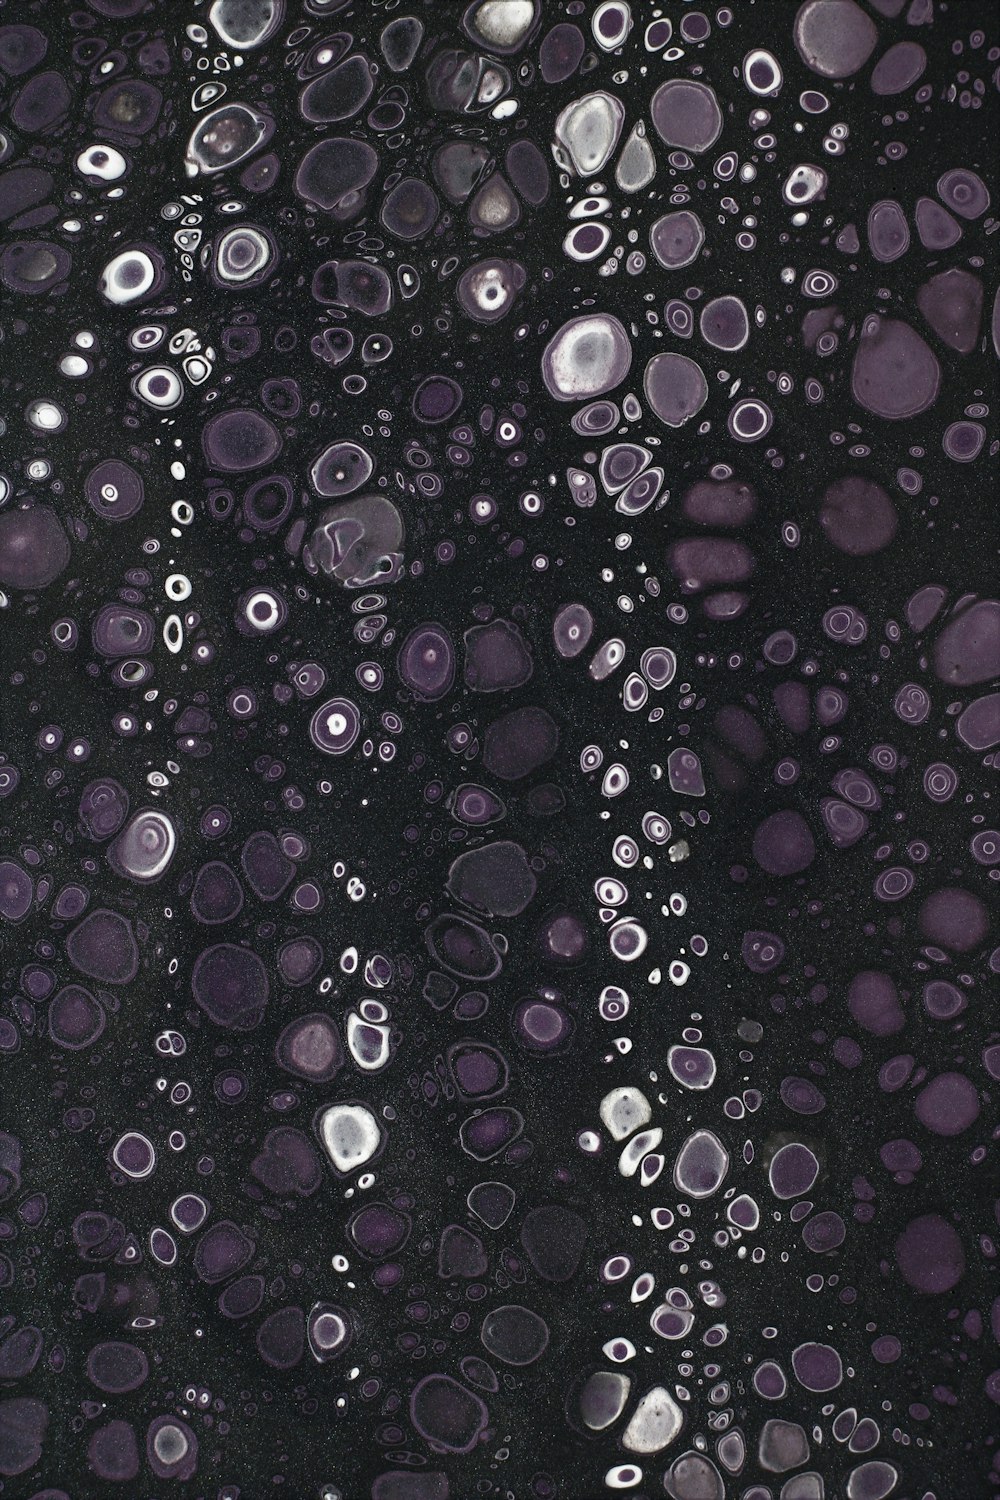 a close up of water bubbles on a black surface